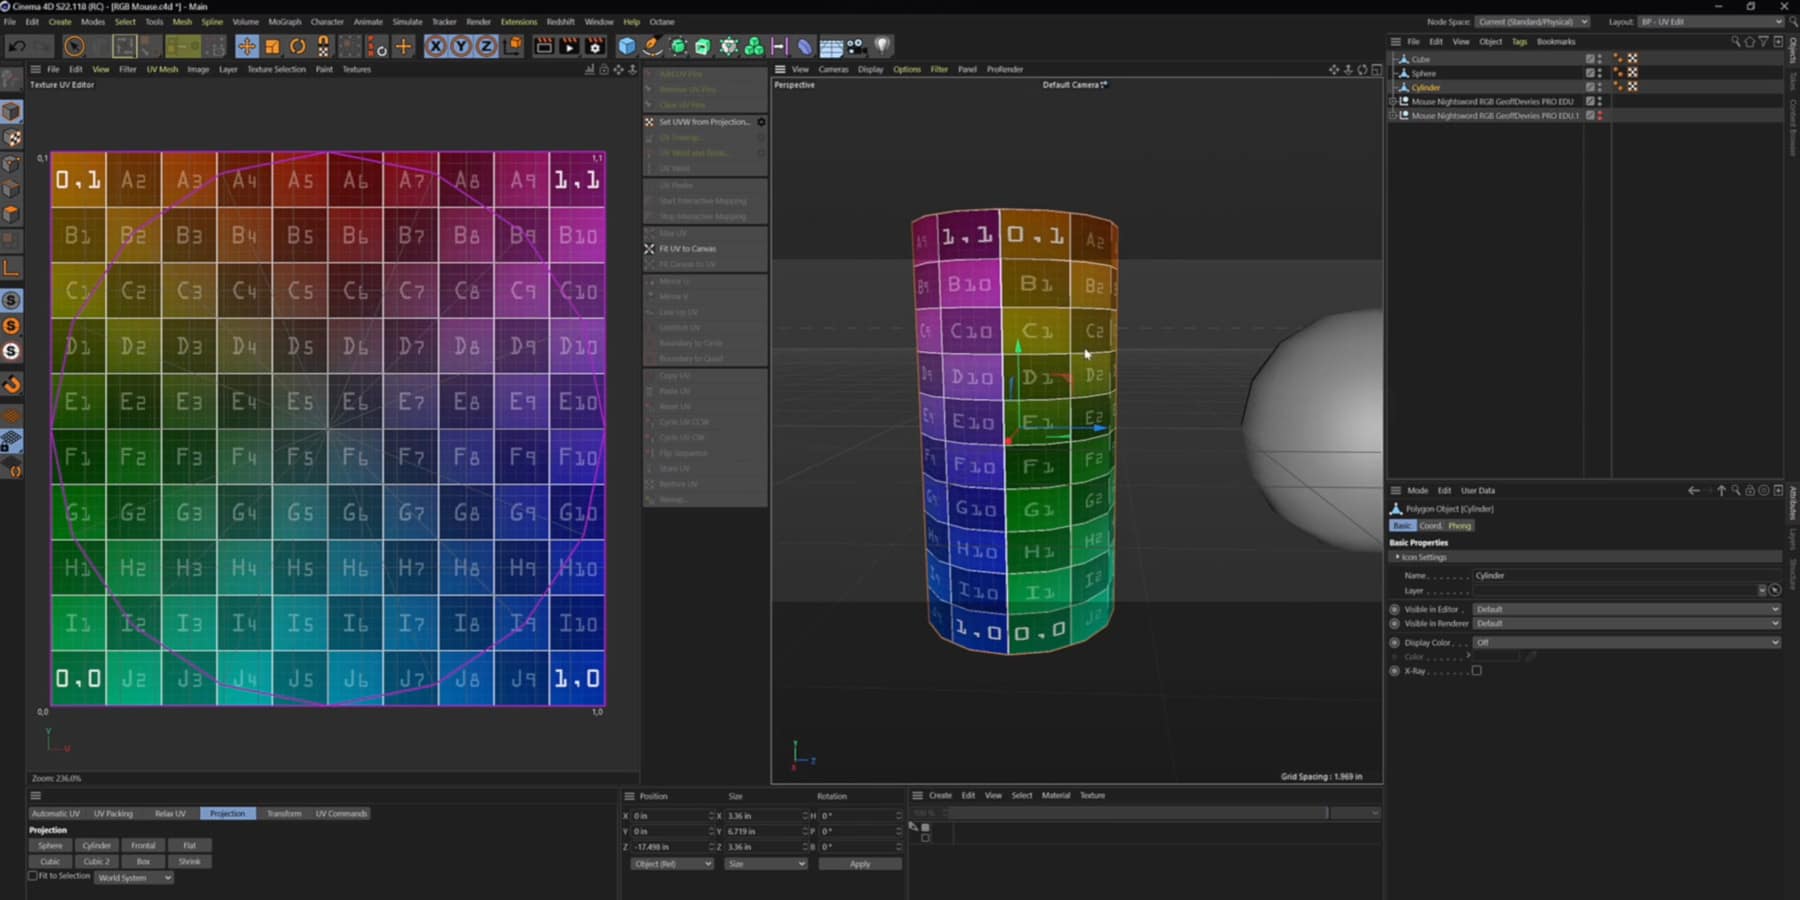 Introduction to Cinema 4d for photographers with Dustin Valkema. UV mapping tutorial and basics for learning c4d from a maxon certified instructor.